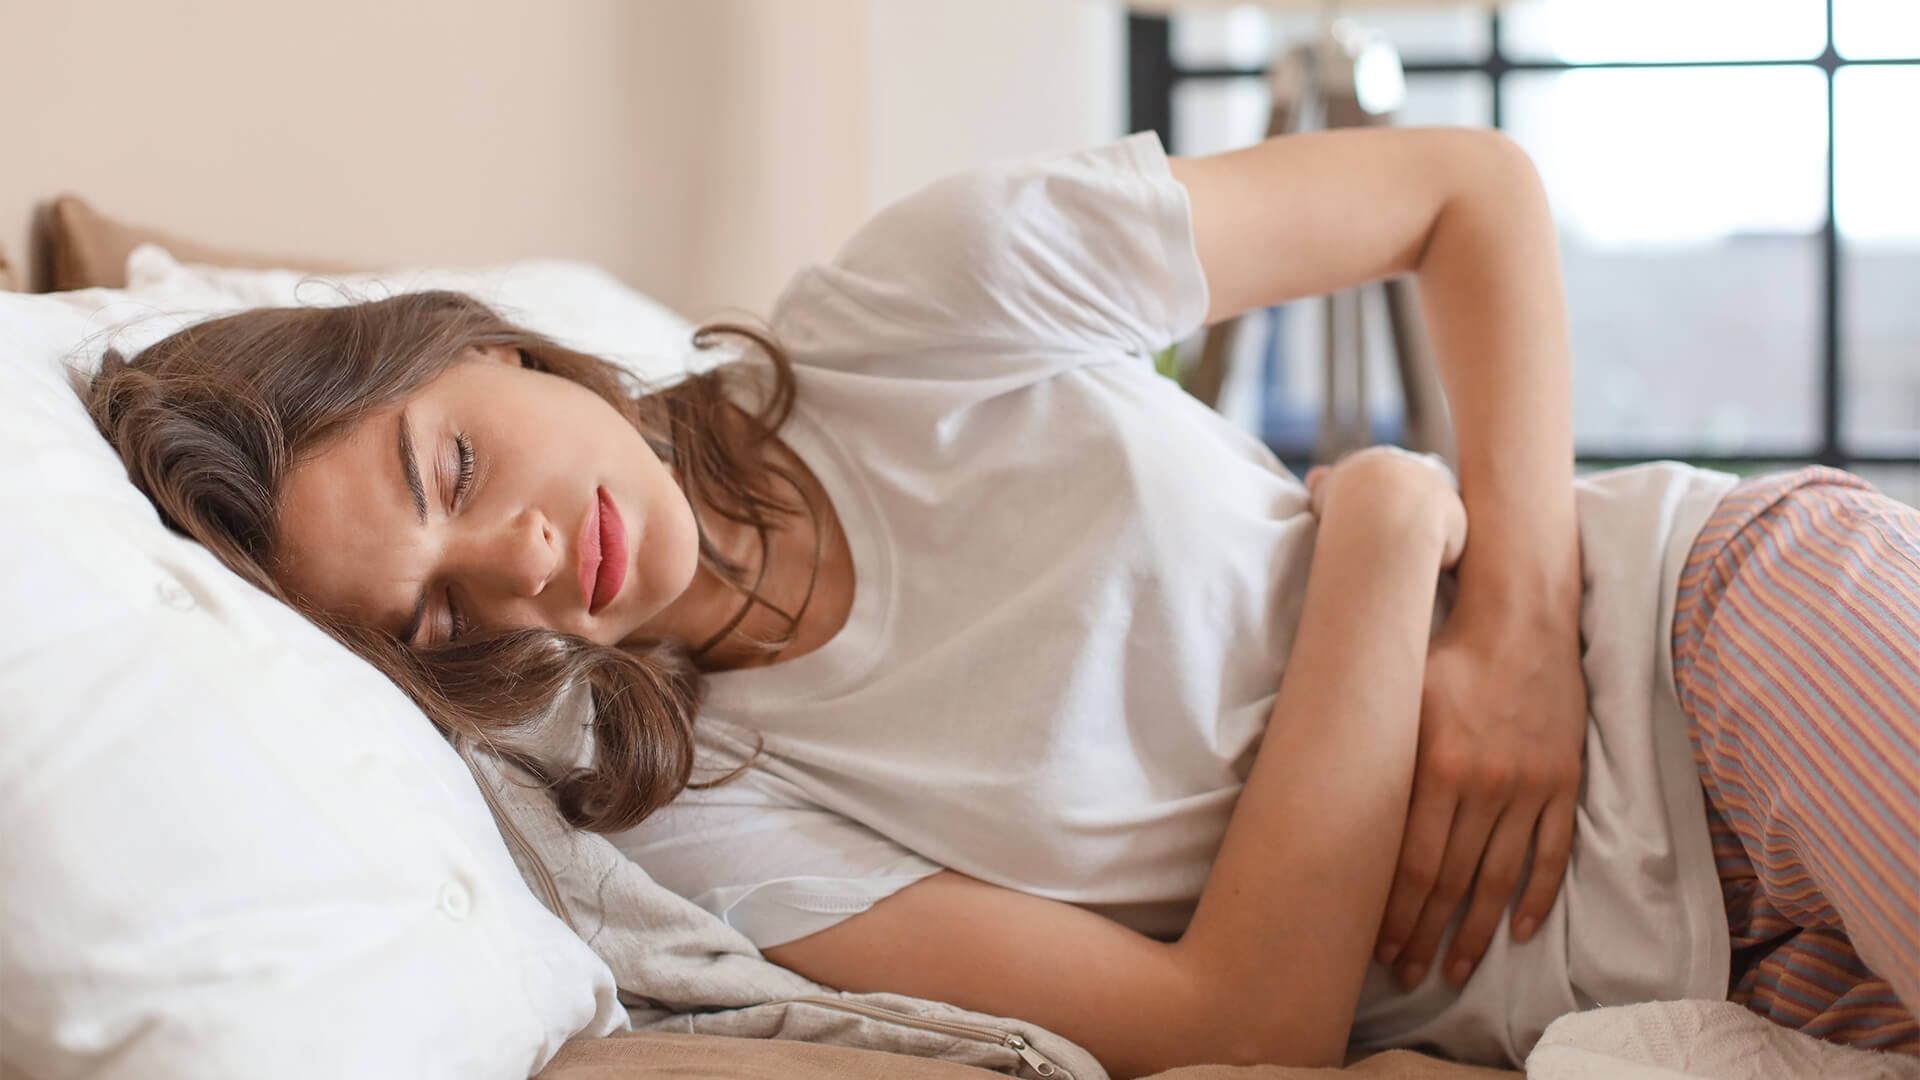 How To Ditch Period Cramps Quickly